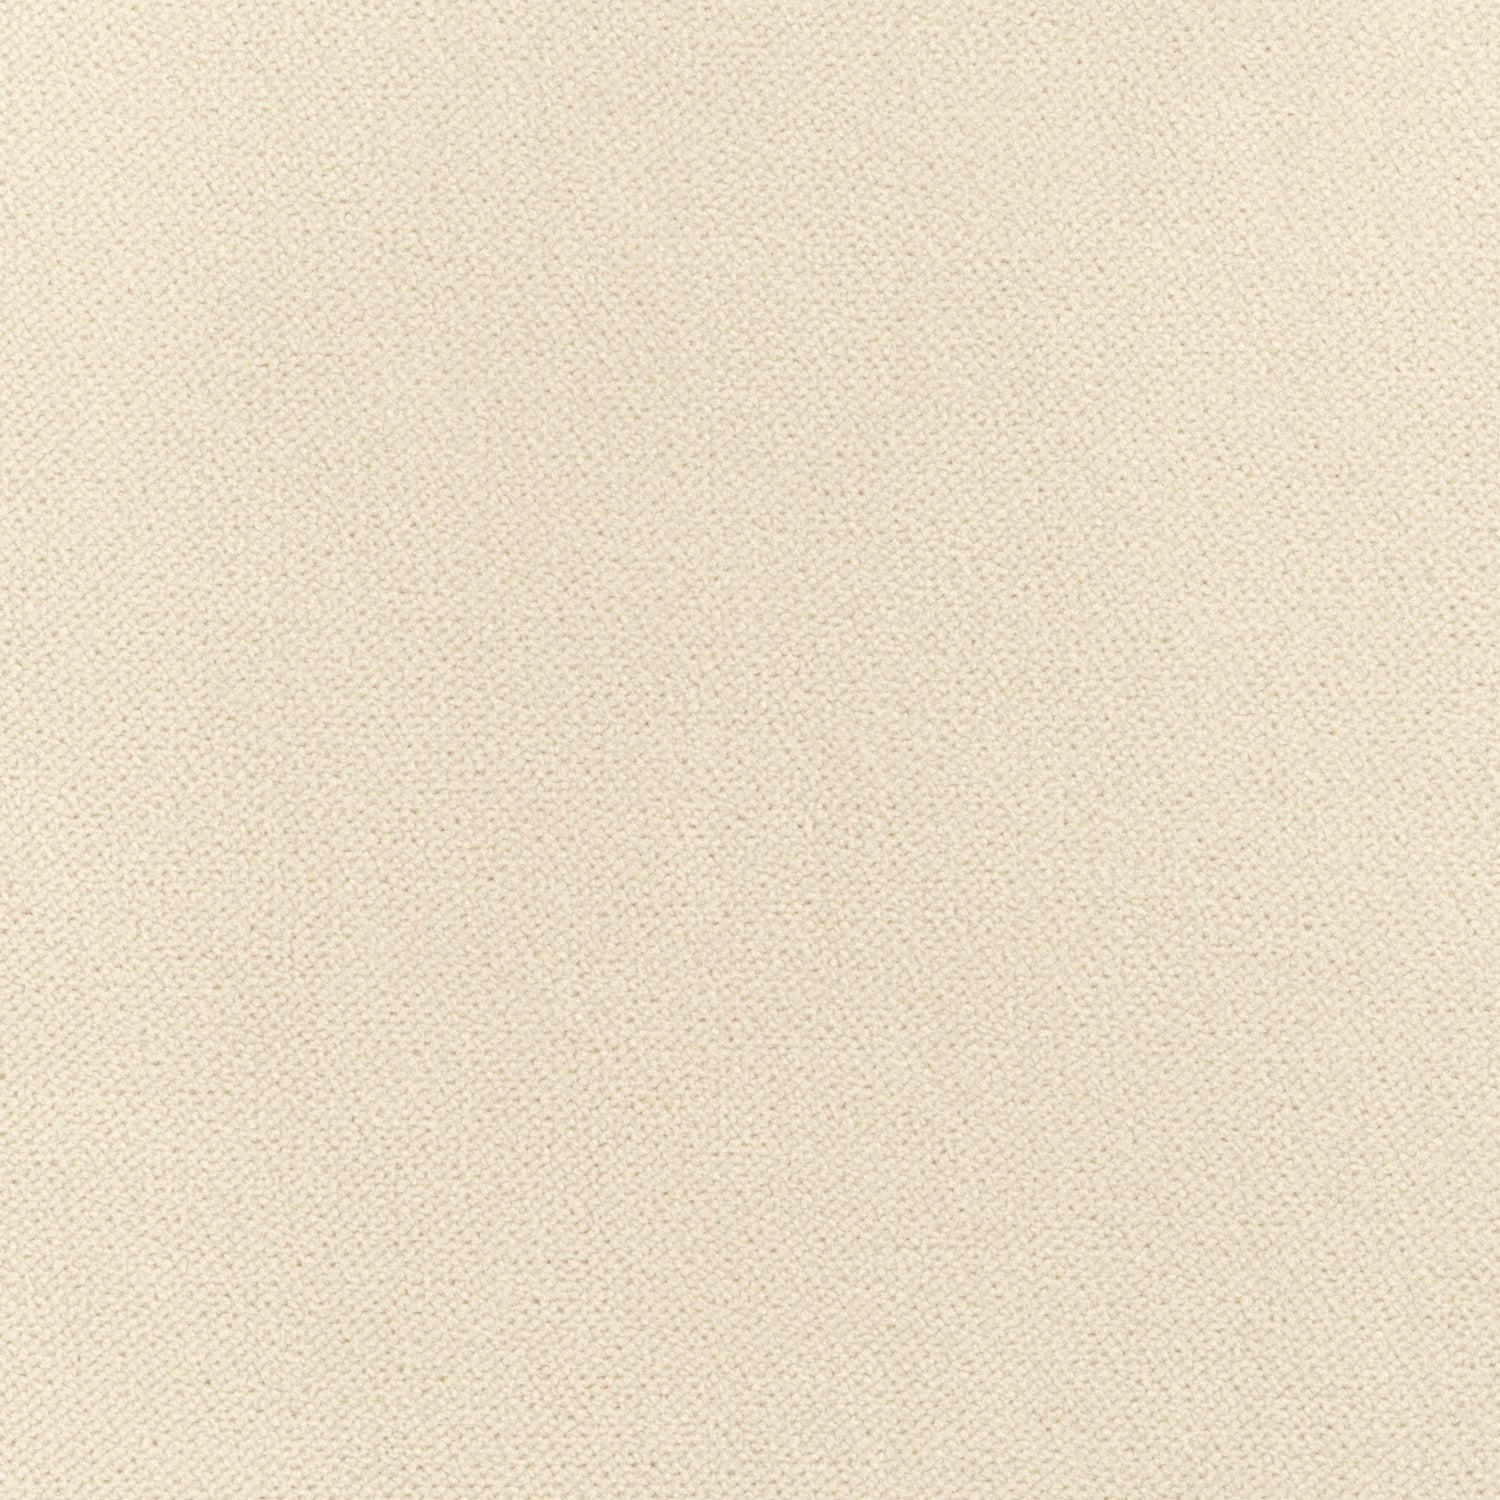 Club Velvet fabric in parchment color - pattern number W7232 - by Thibaut in the Club Velvet collection